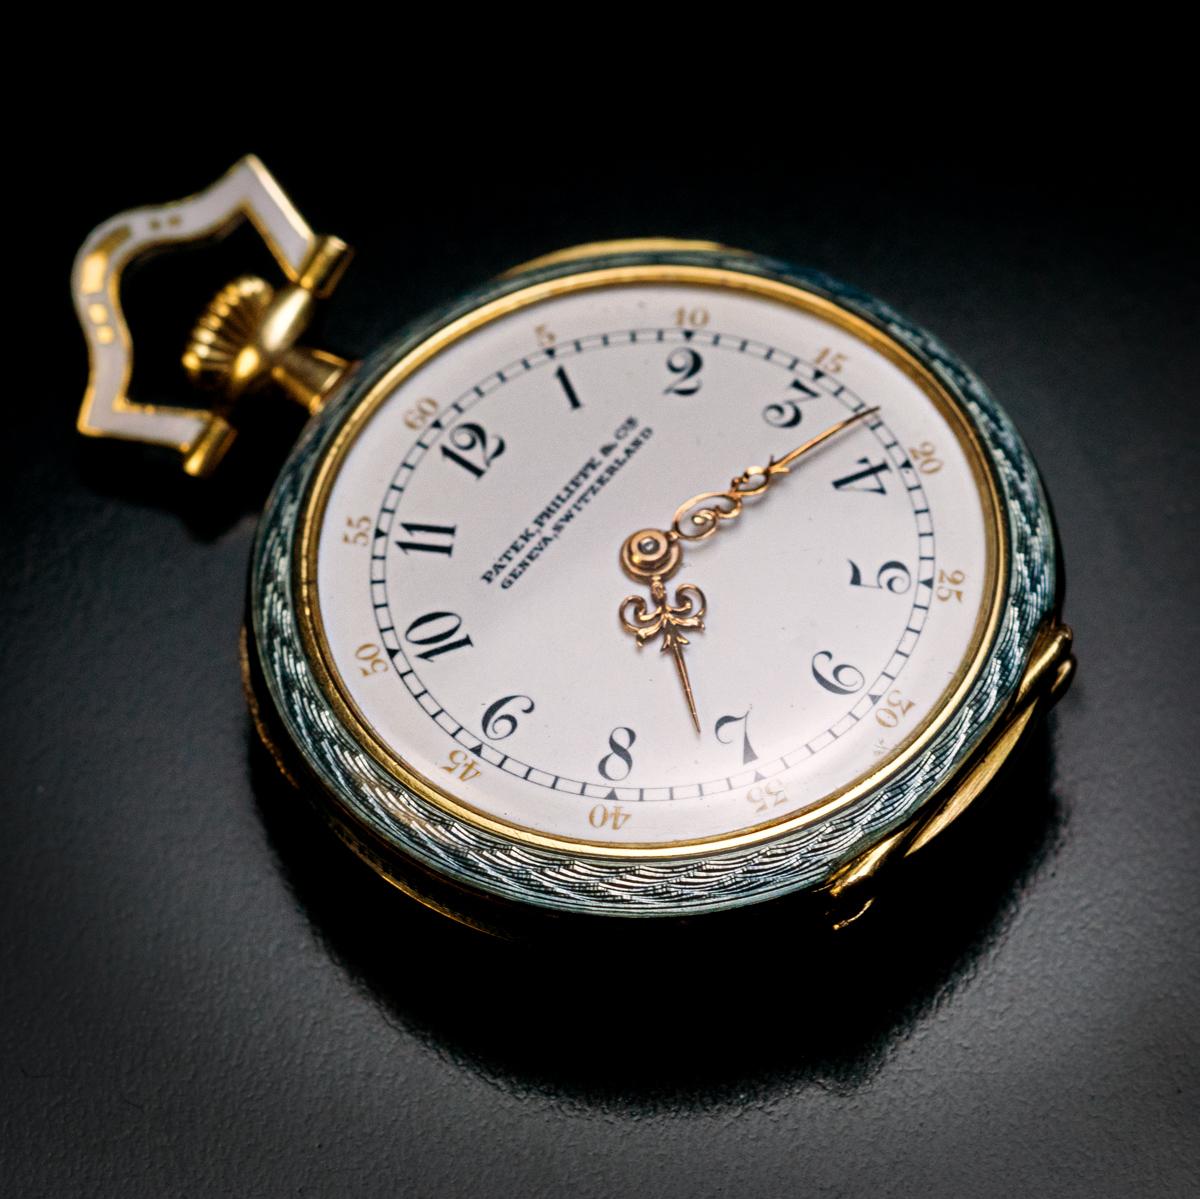 Made in Geneva, Switzerland in 1910.

This rare PATEK PHILIPPE 18K gold, platinum, diamond, gray guilloche, and opaque enamel pendant watch is in a pristine condition.

The embellishments of the watch were influenced by the Garland style of the